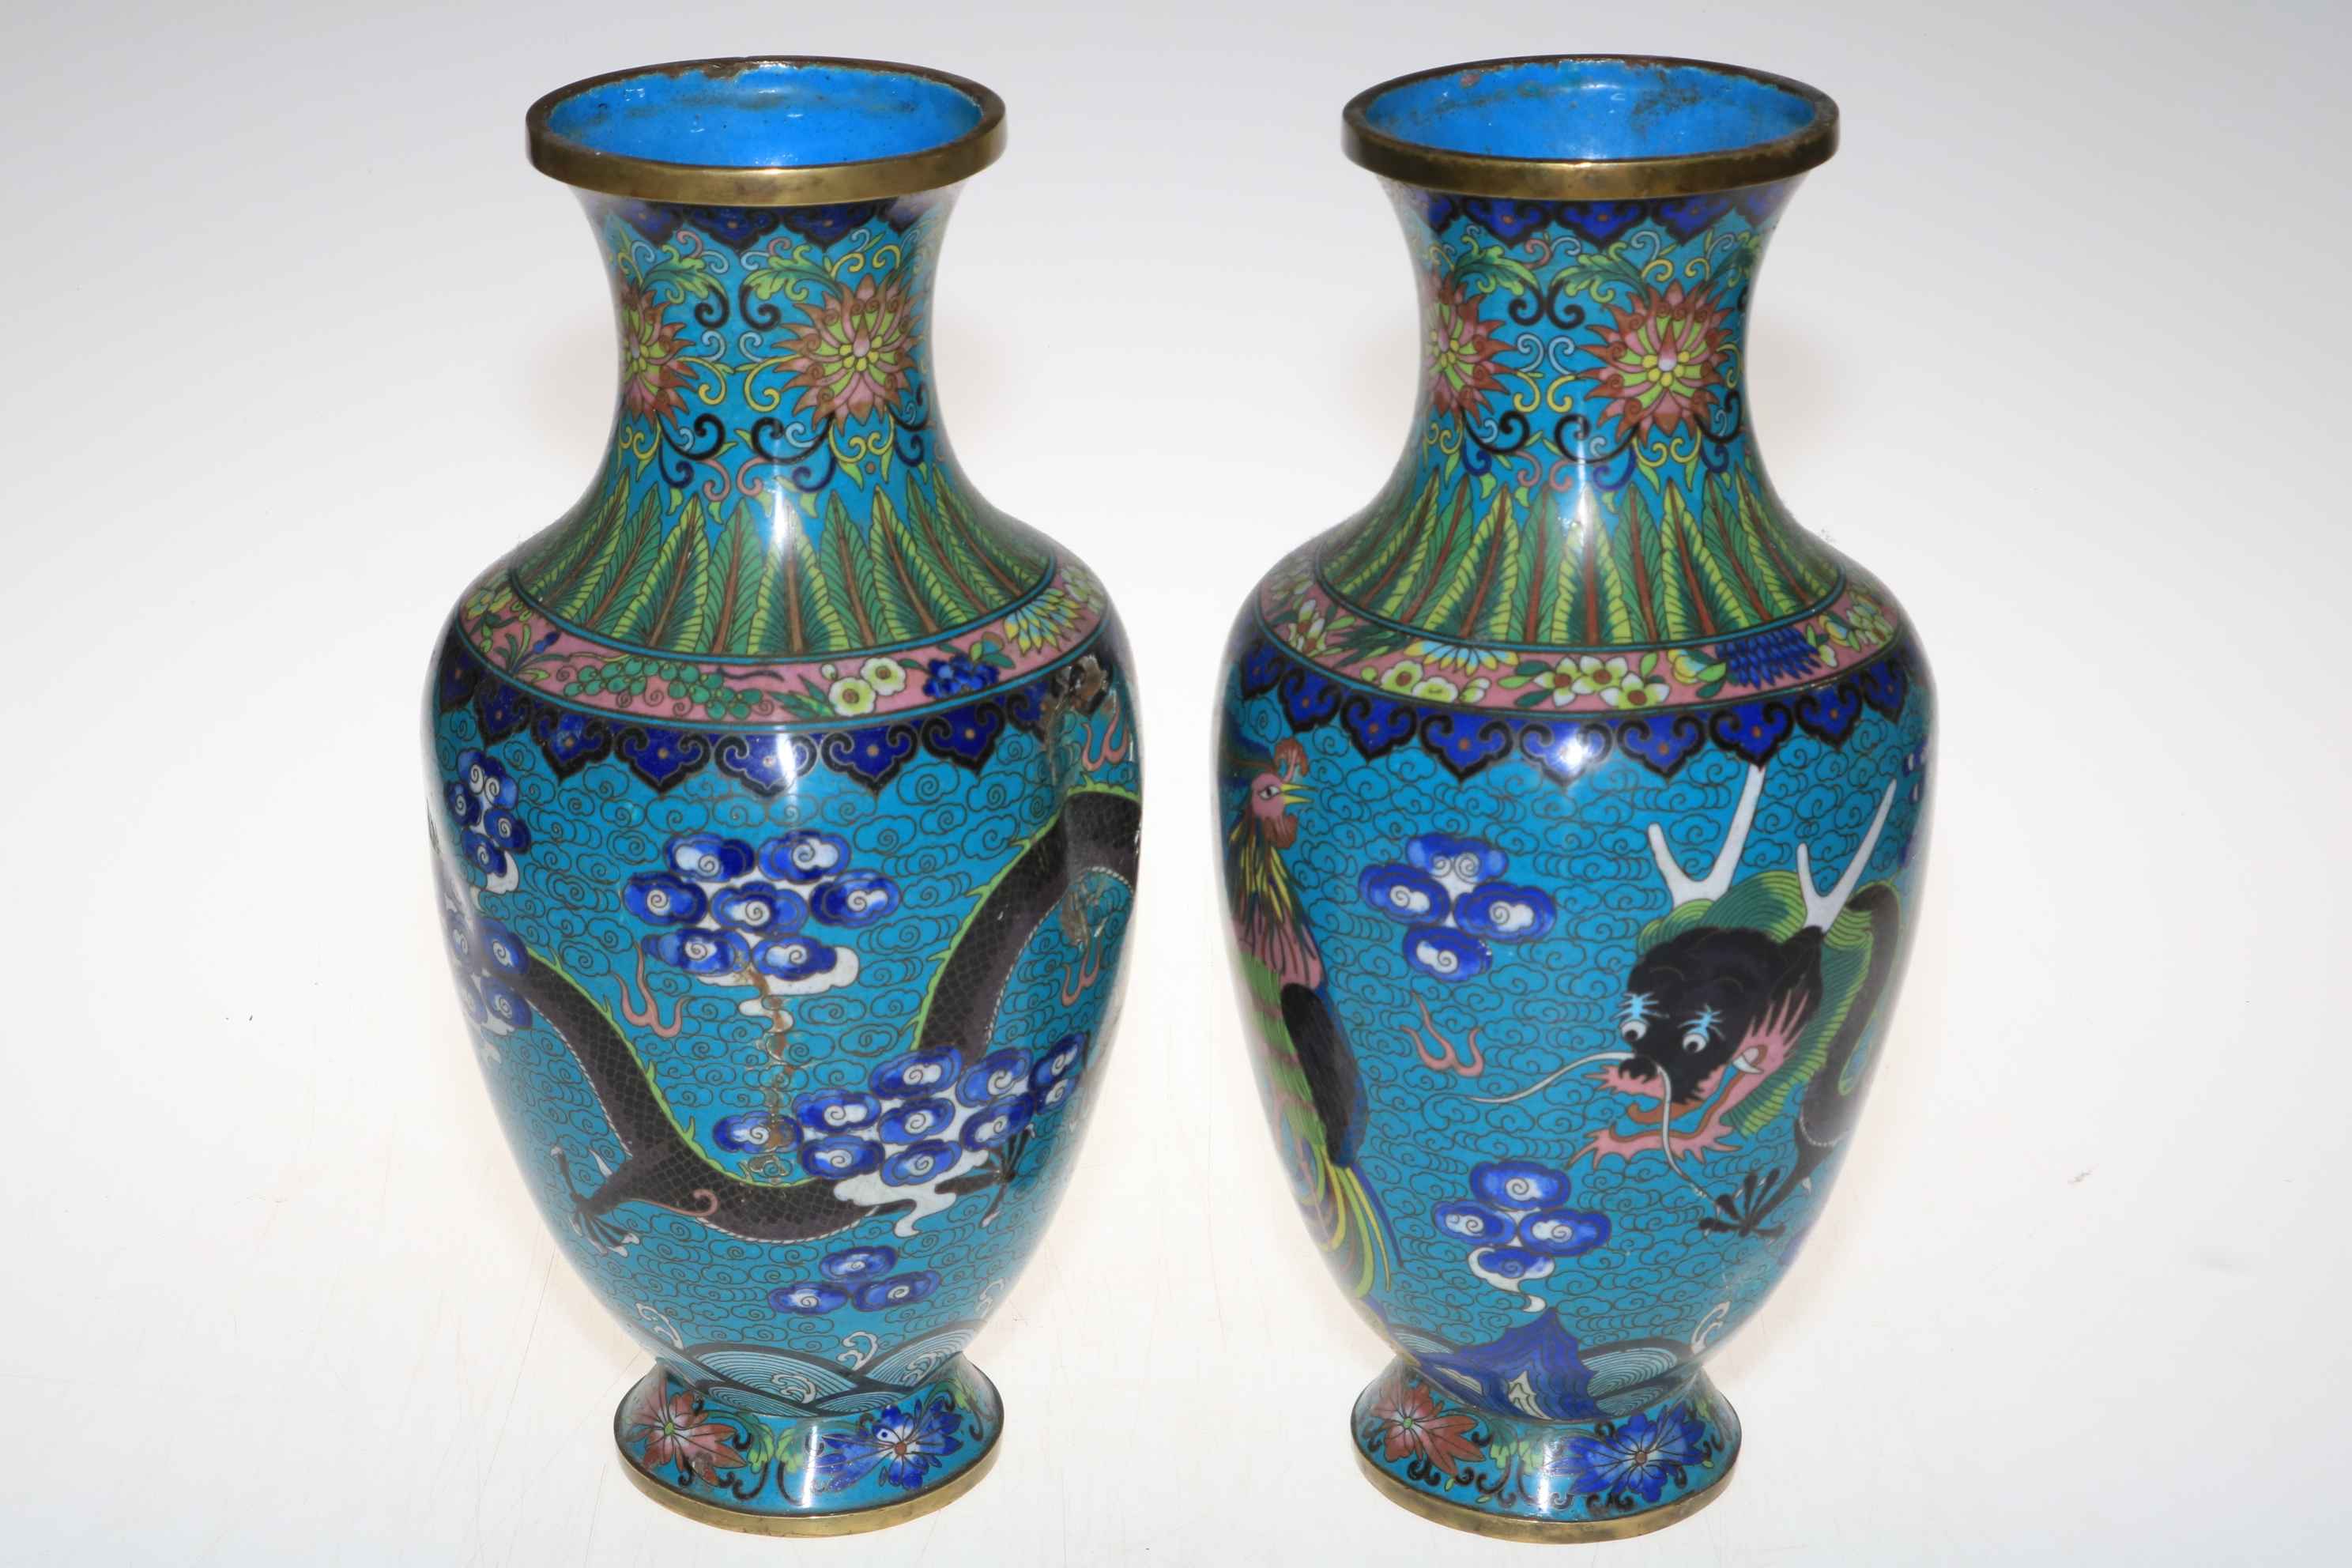 Large pair of Cloisonné vases with dragon and floral design, 32cm high.